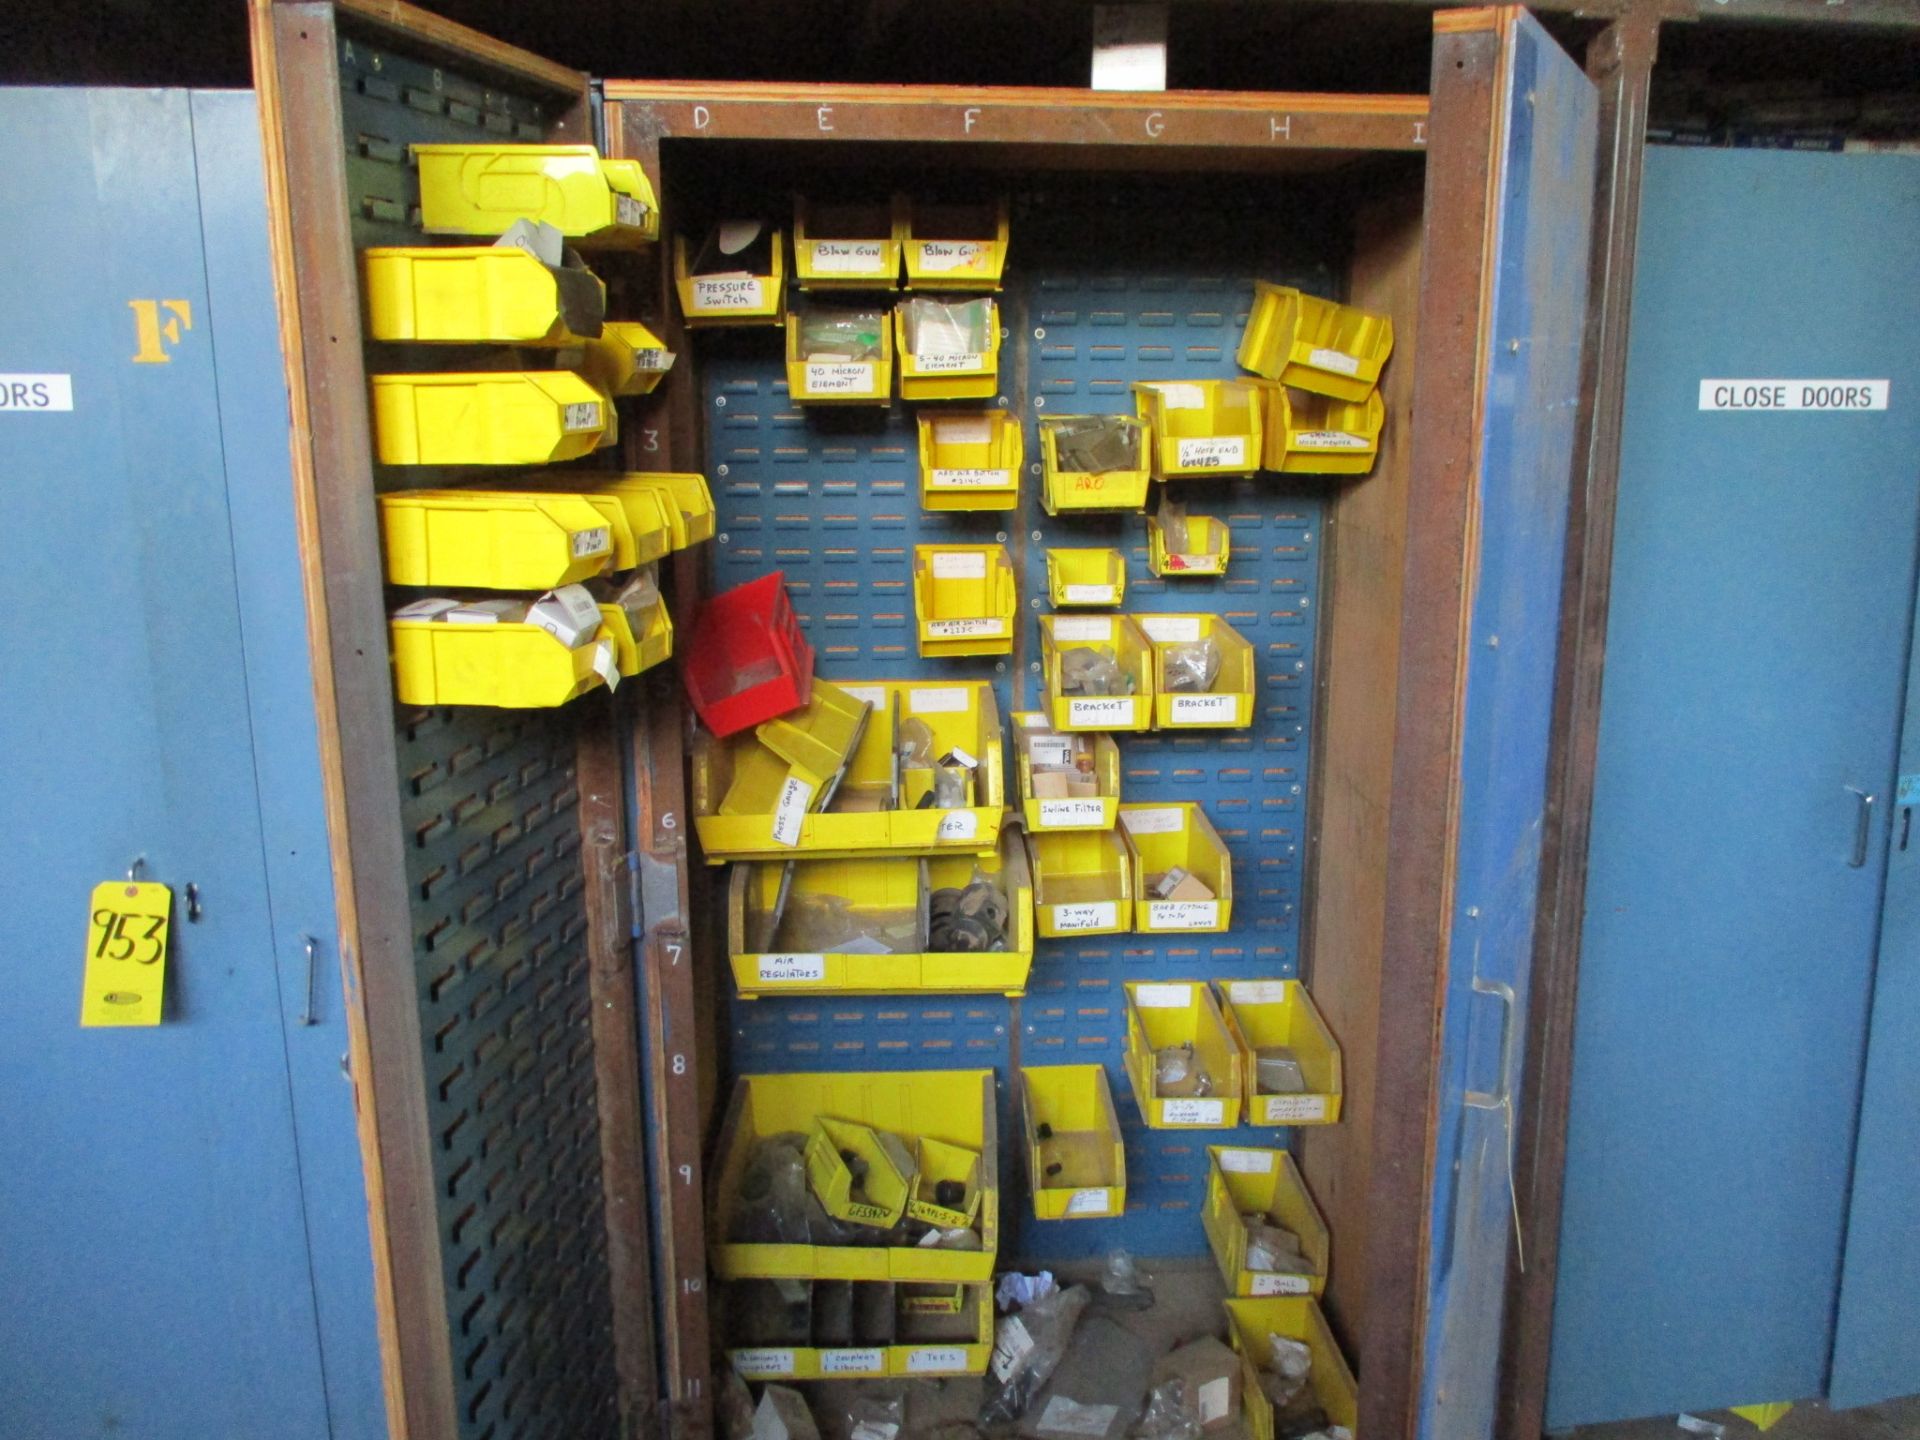 Custom Built 2-Door Heavy Duty Parts Storage Cabinet with Part Bins and Contents - Image 2 of 2